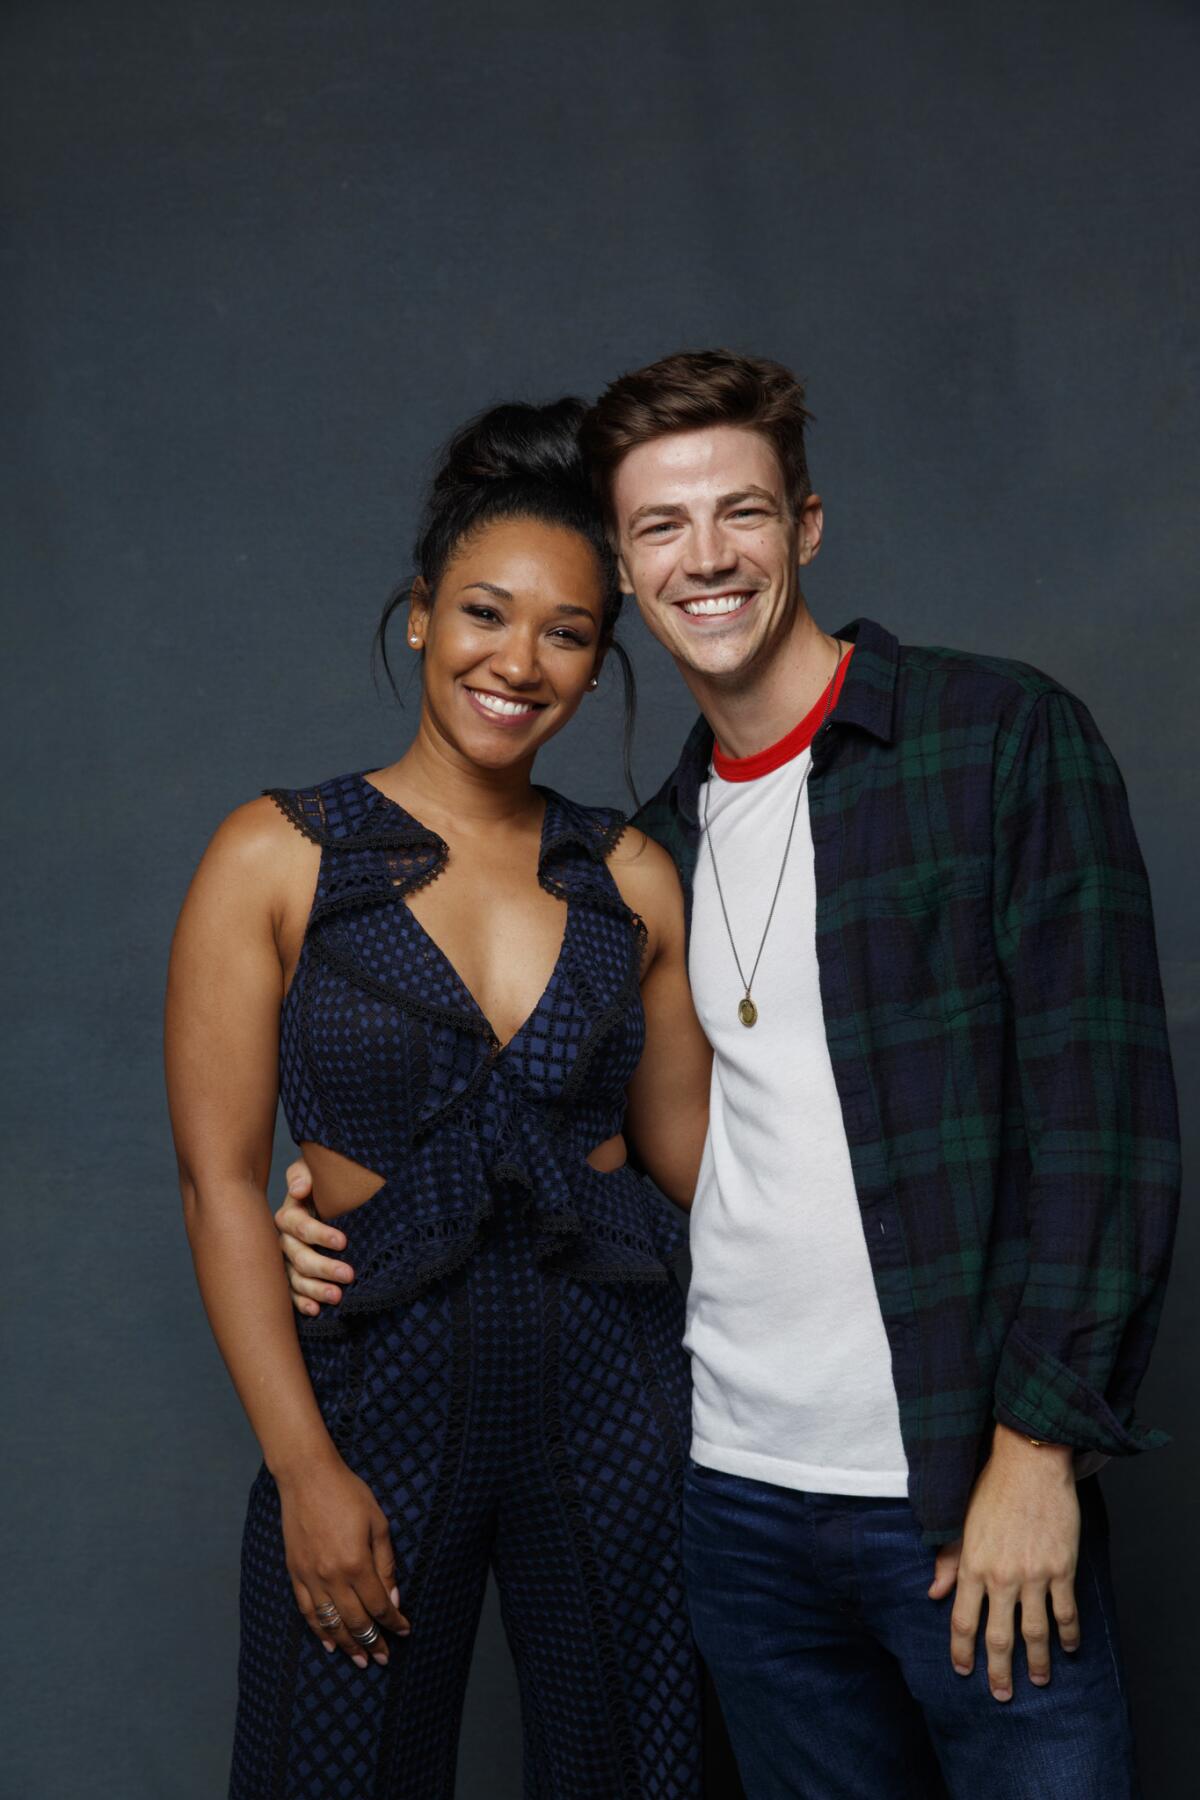 Candice Patton and Grant Gustin from the television series "The Flash."